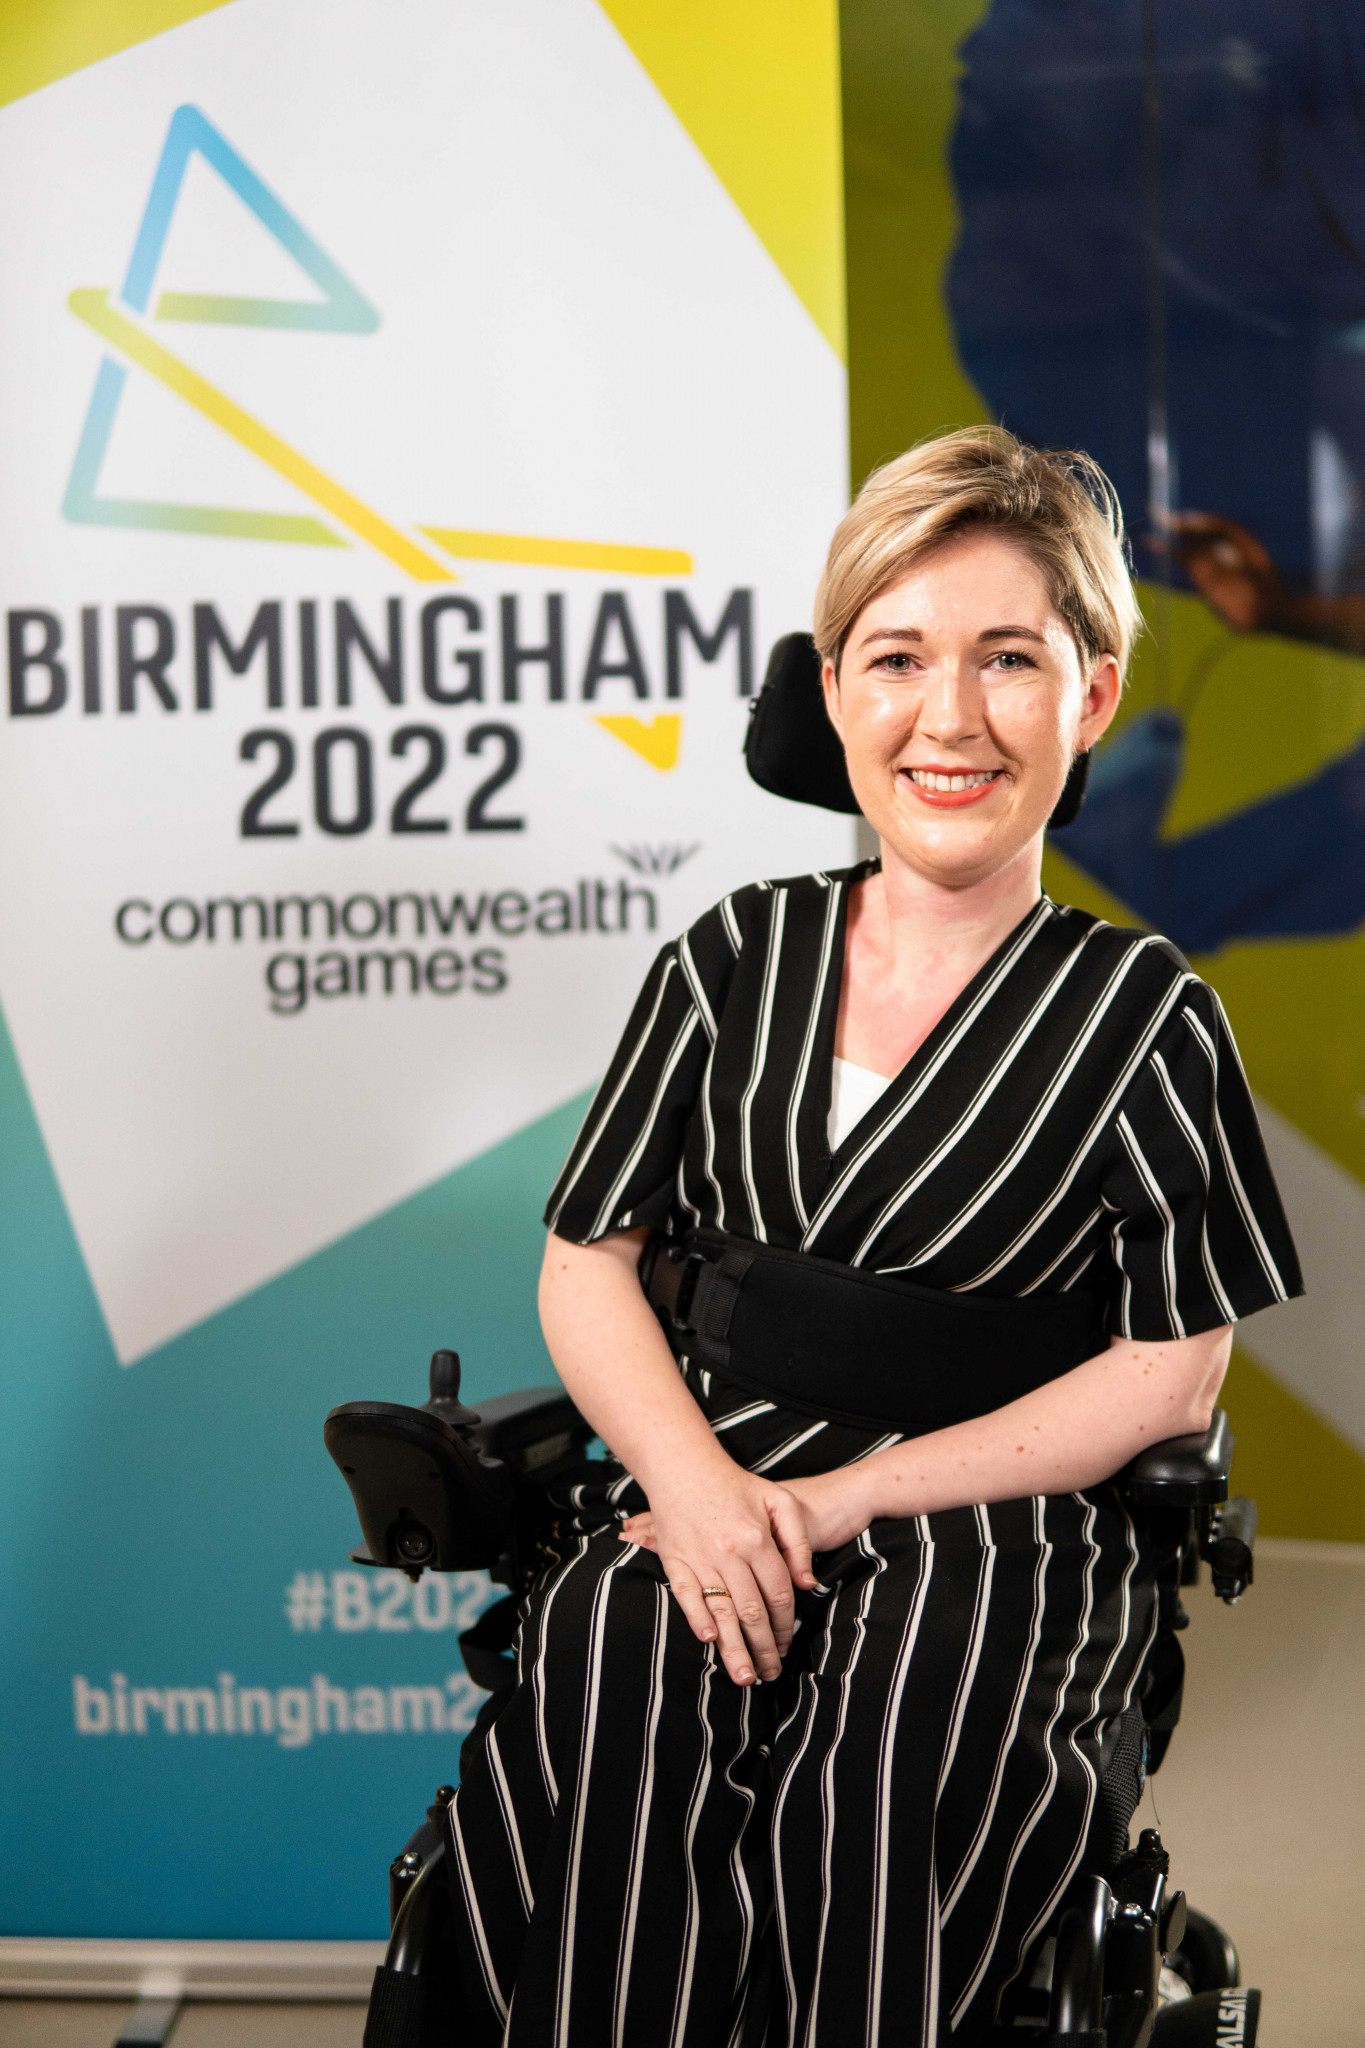 Sarah Rennie has been appointed to chair the Birmingham 2022 Accessibility Advisory Forum ©Birmingham 2022